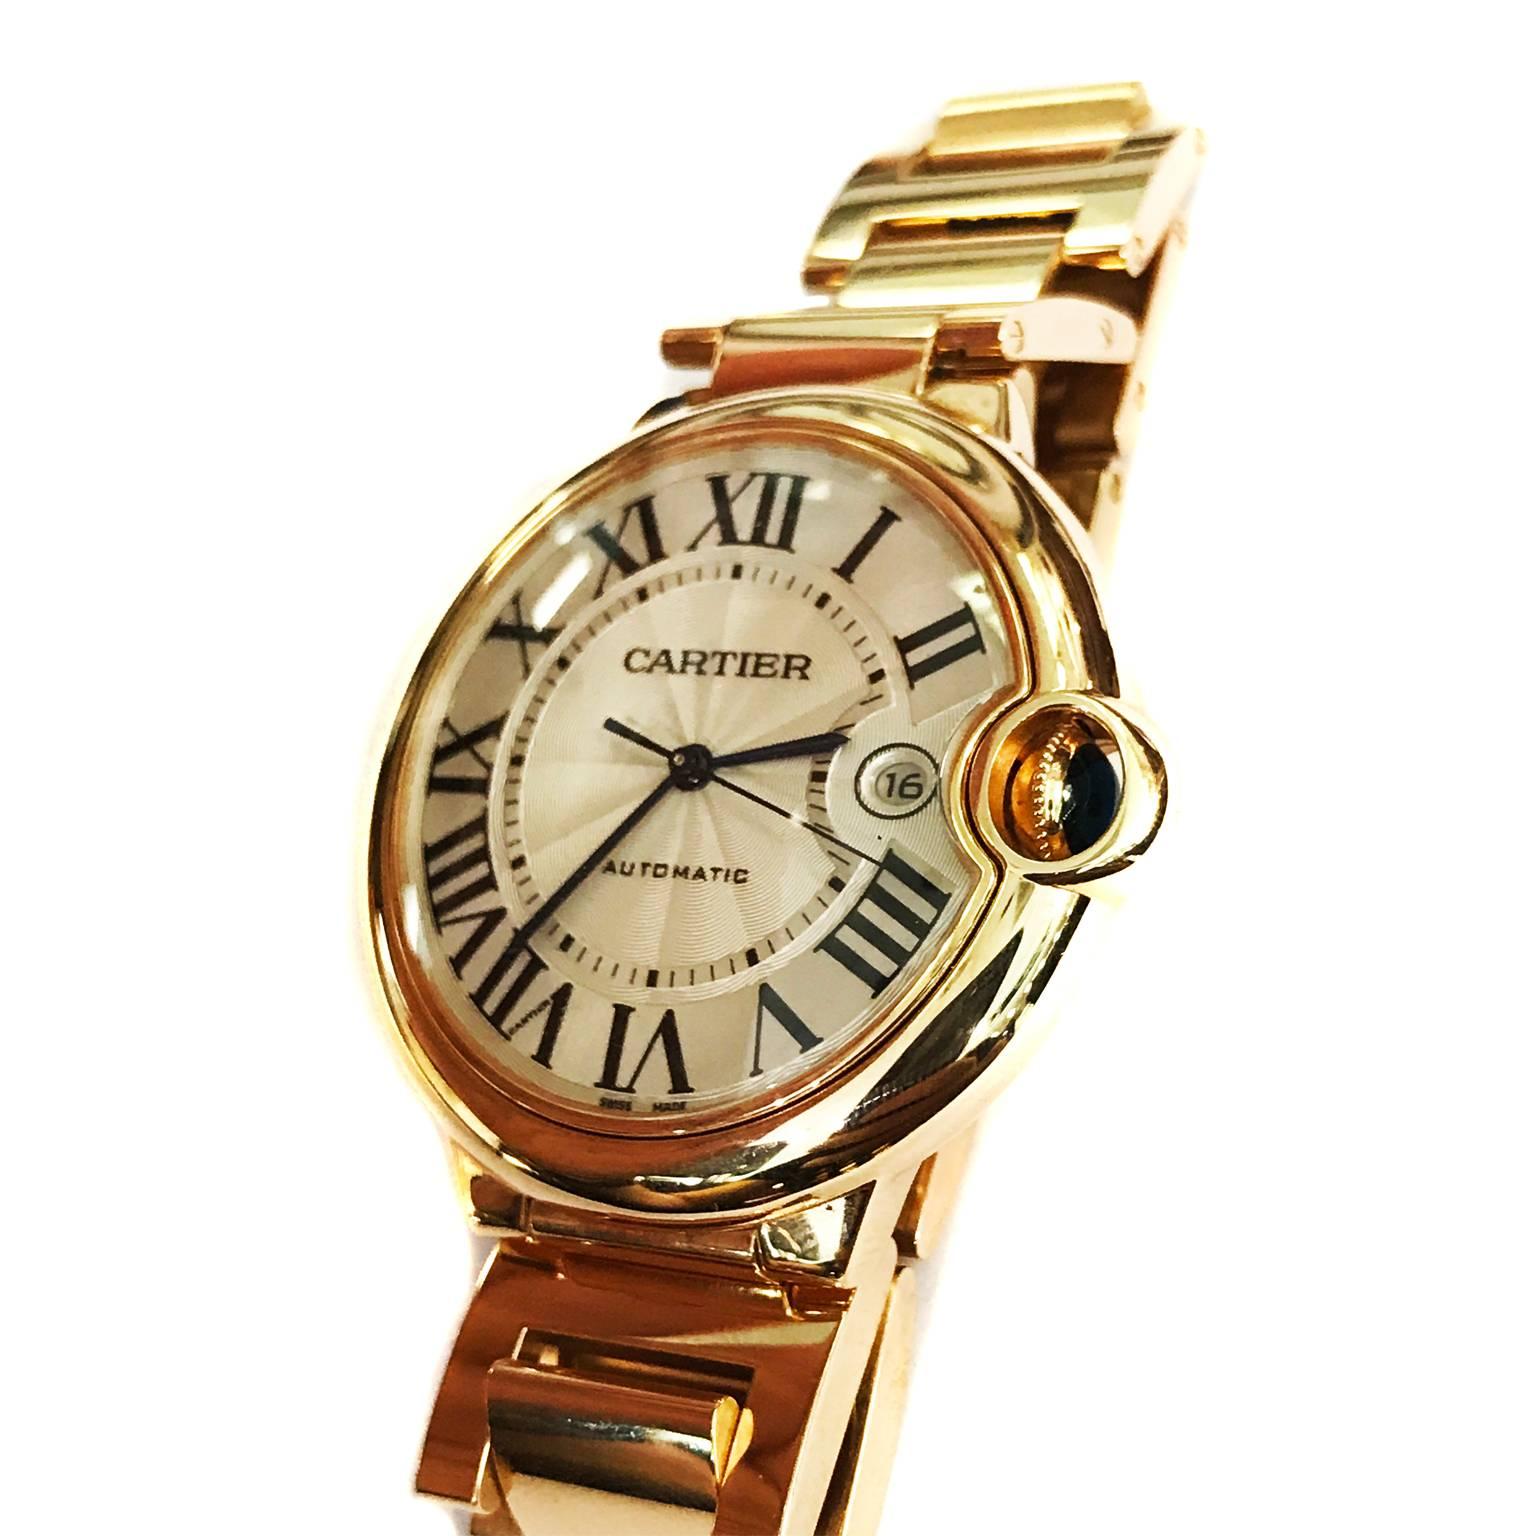 CARTIER Ballon Bleu 18K Rose Gold Watch

Model: W69006Z2
42mm Case

18K Rose Gold Band, Crown, Case

Comes with box and papers

Retail: $32,900.00

USED